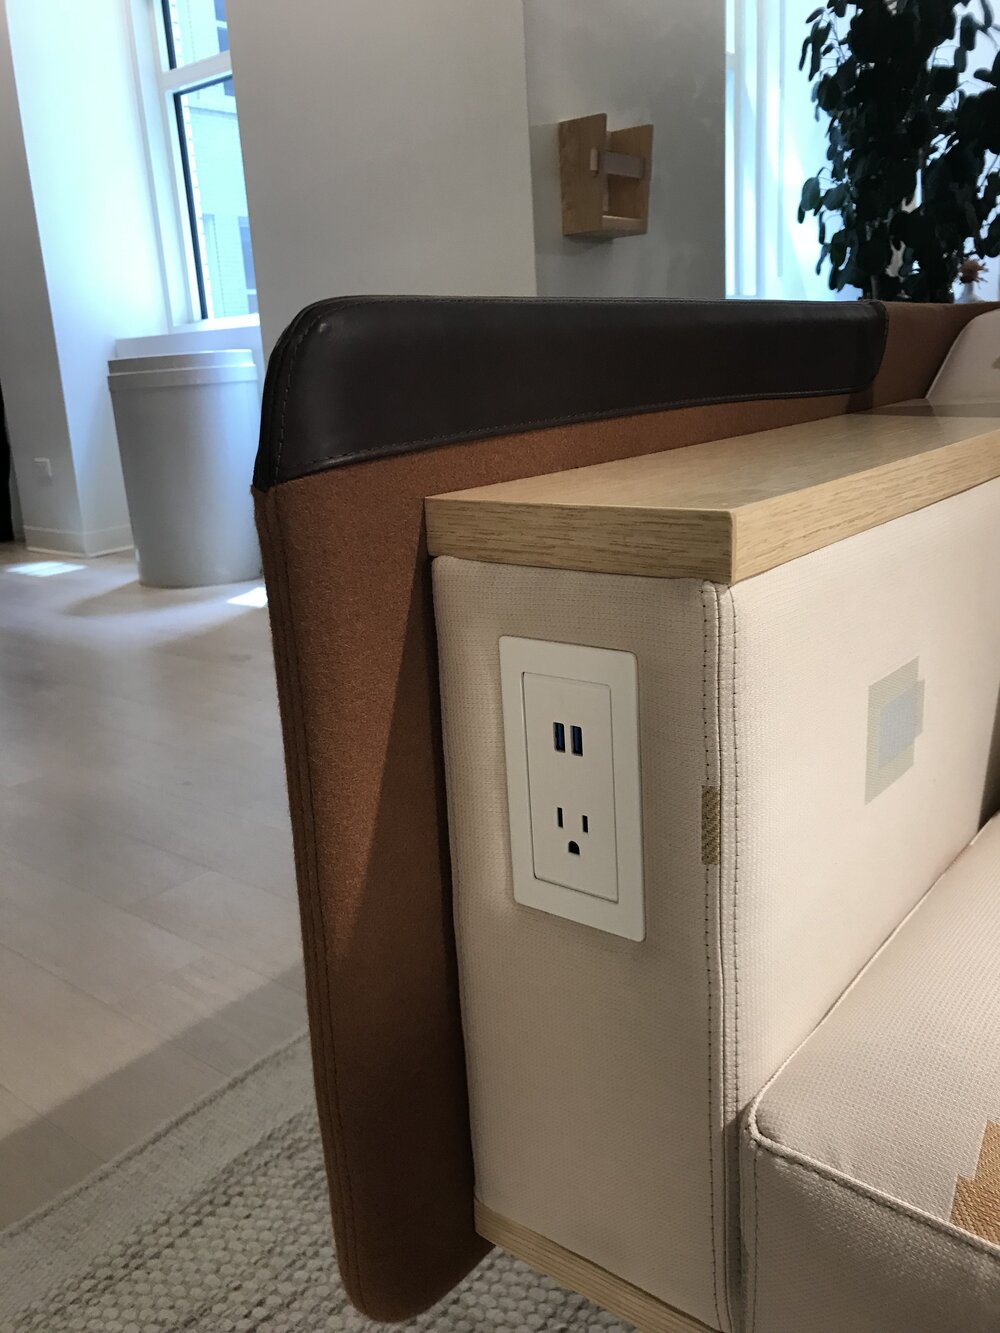  There was no lack of USB ports integrated into furniture. 